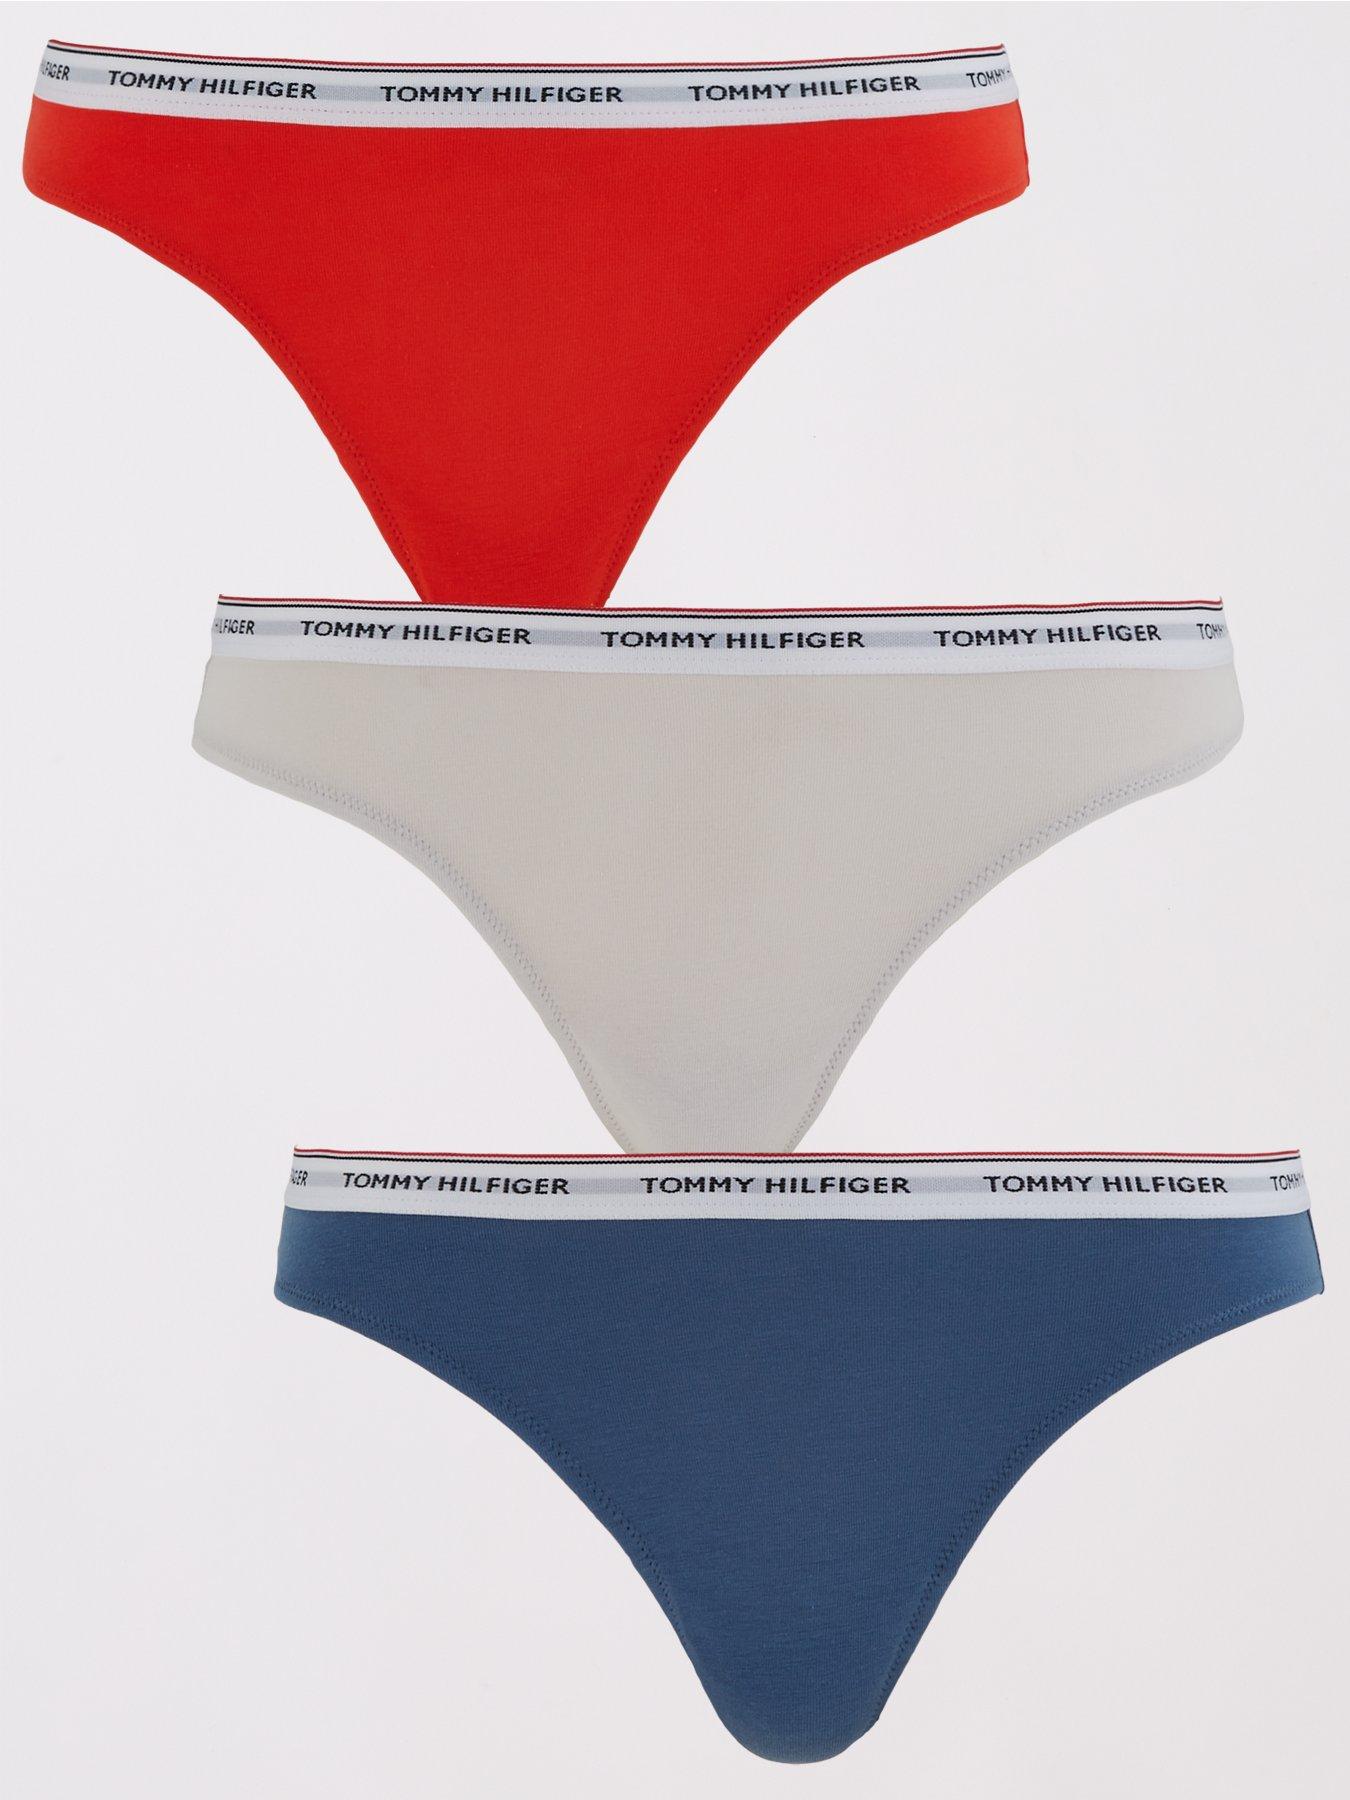 Tommy Hilfiger womens Underwear Classic Cotton Logoband Panties 7